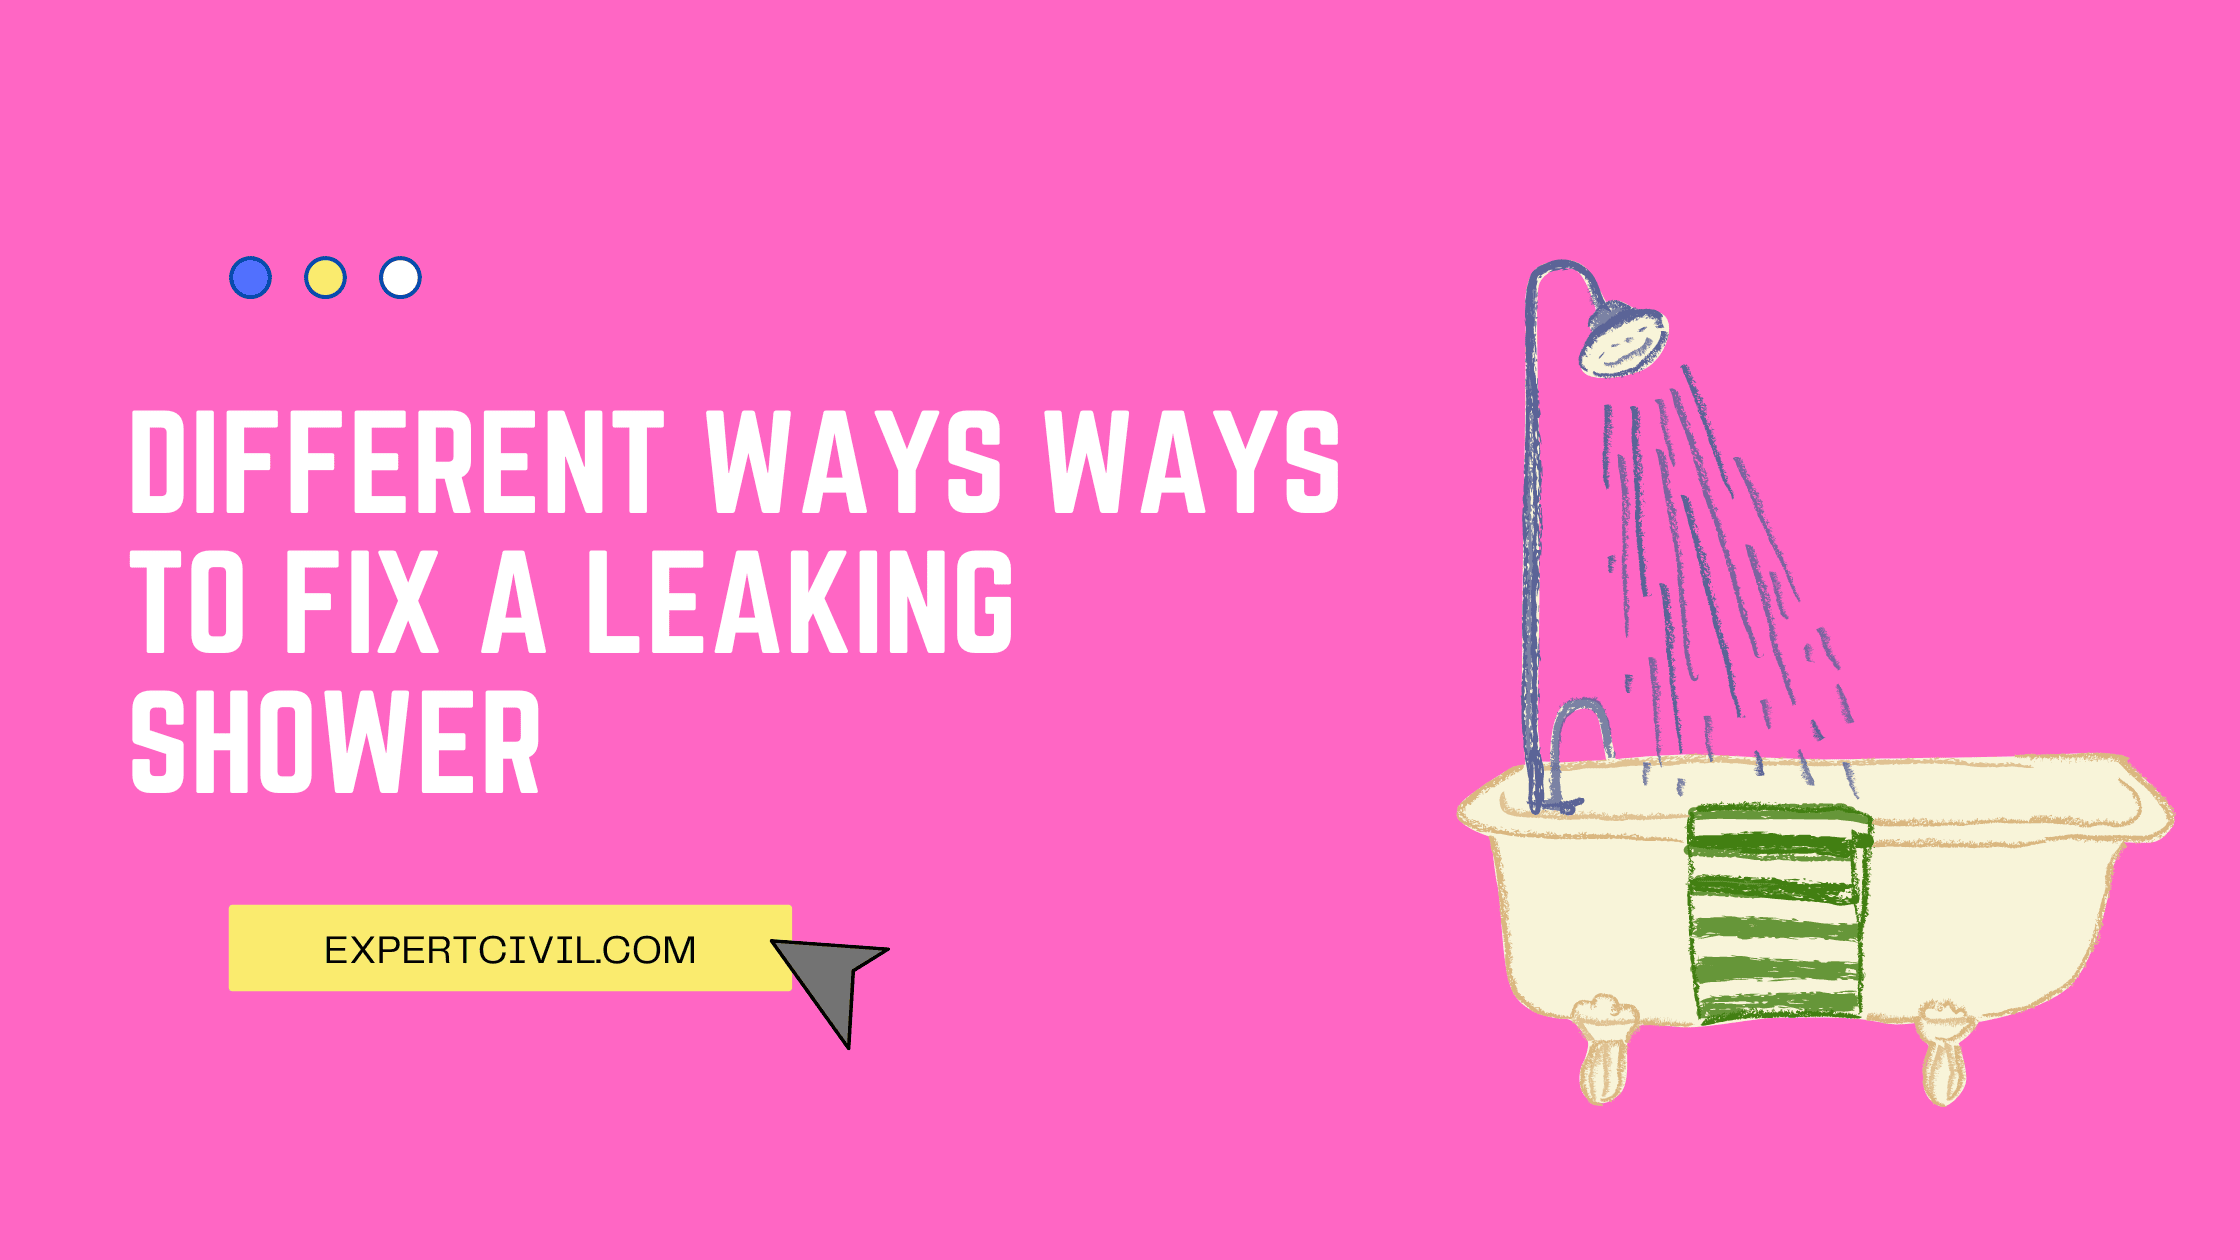 6 Ways to Fix a Leaking Shower